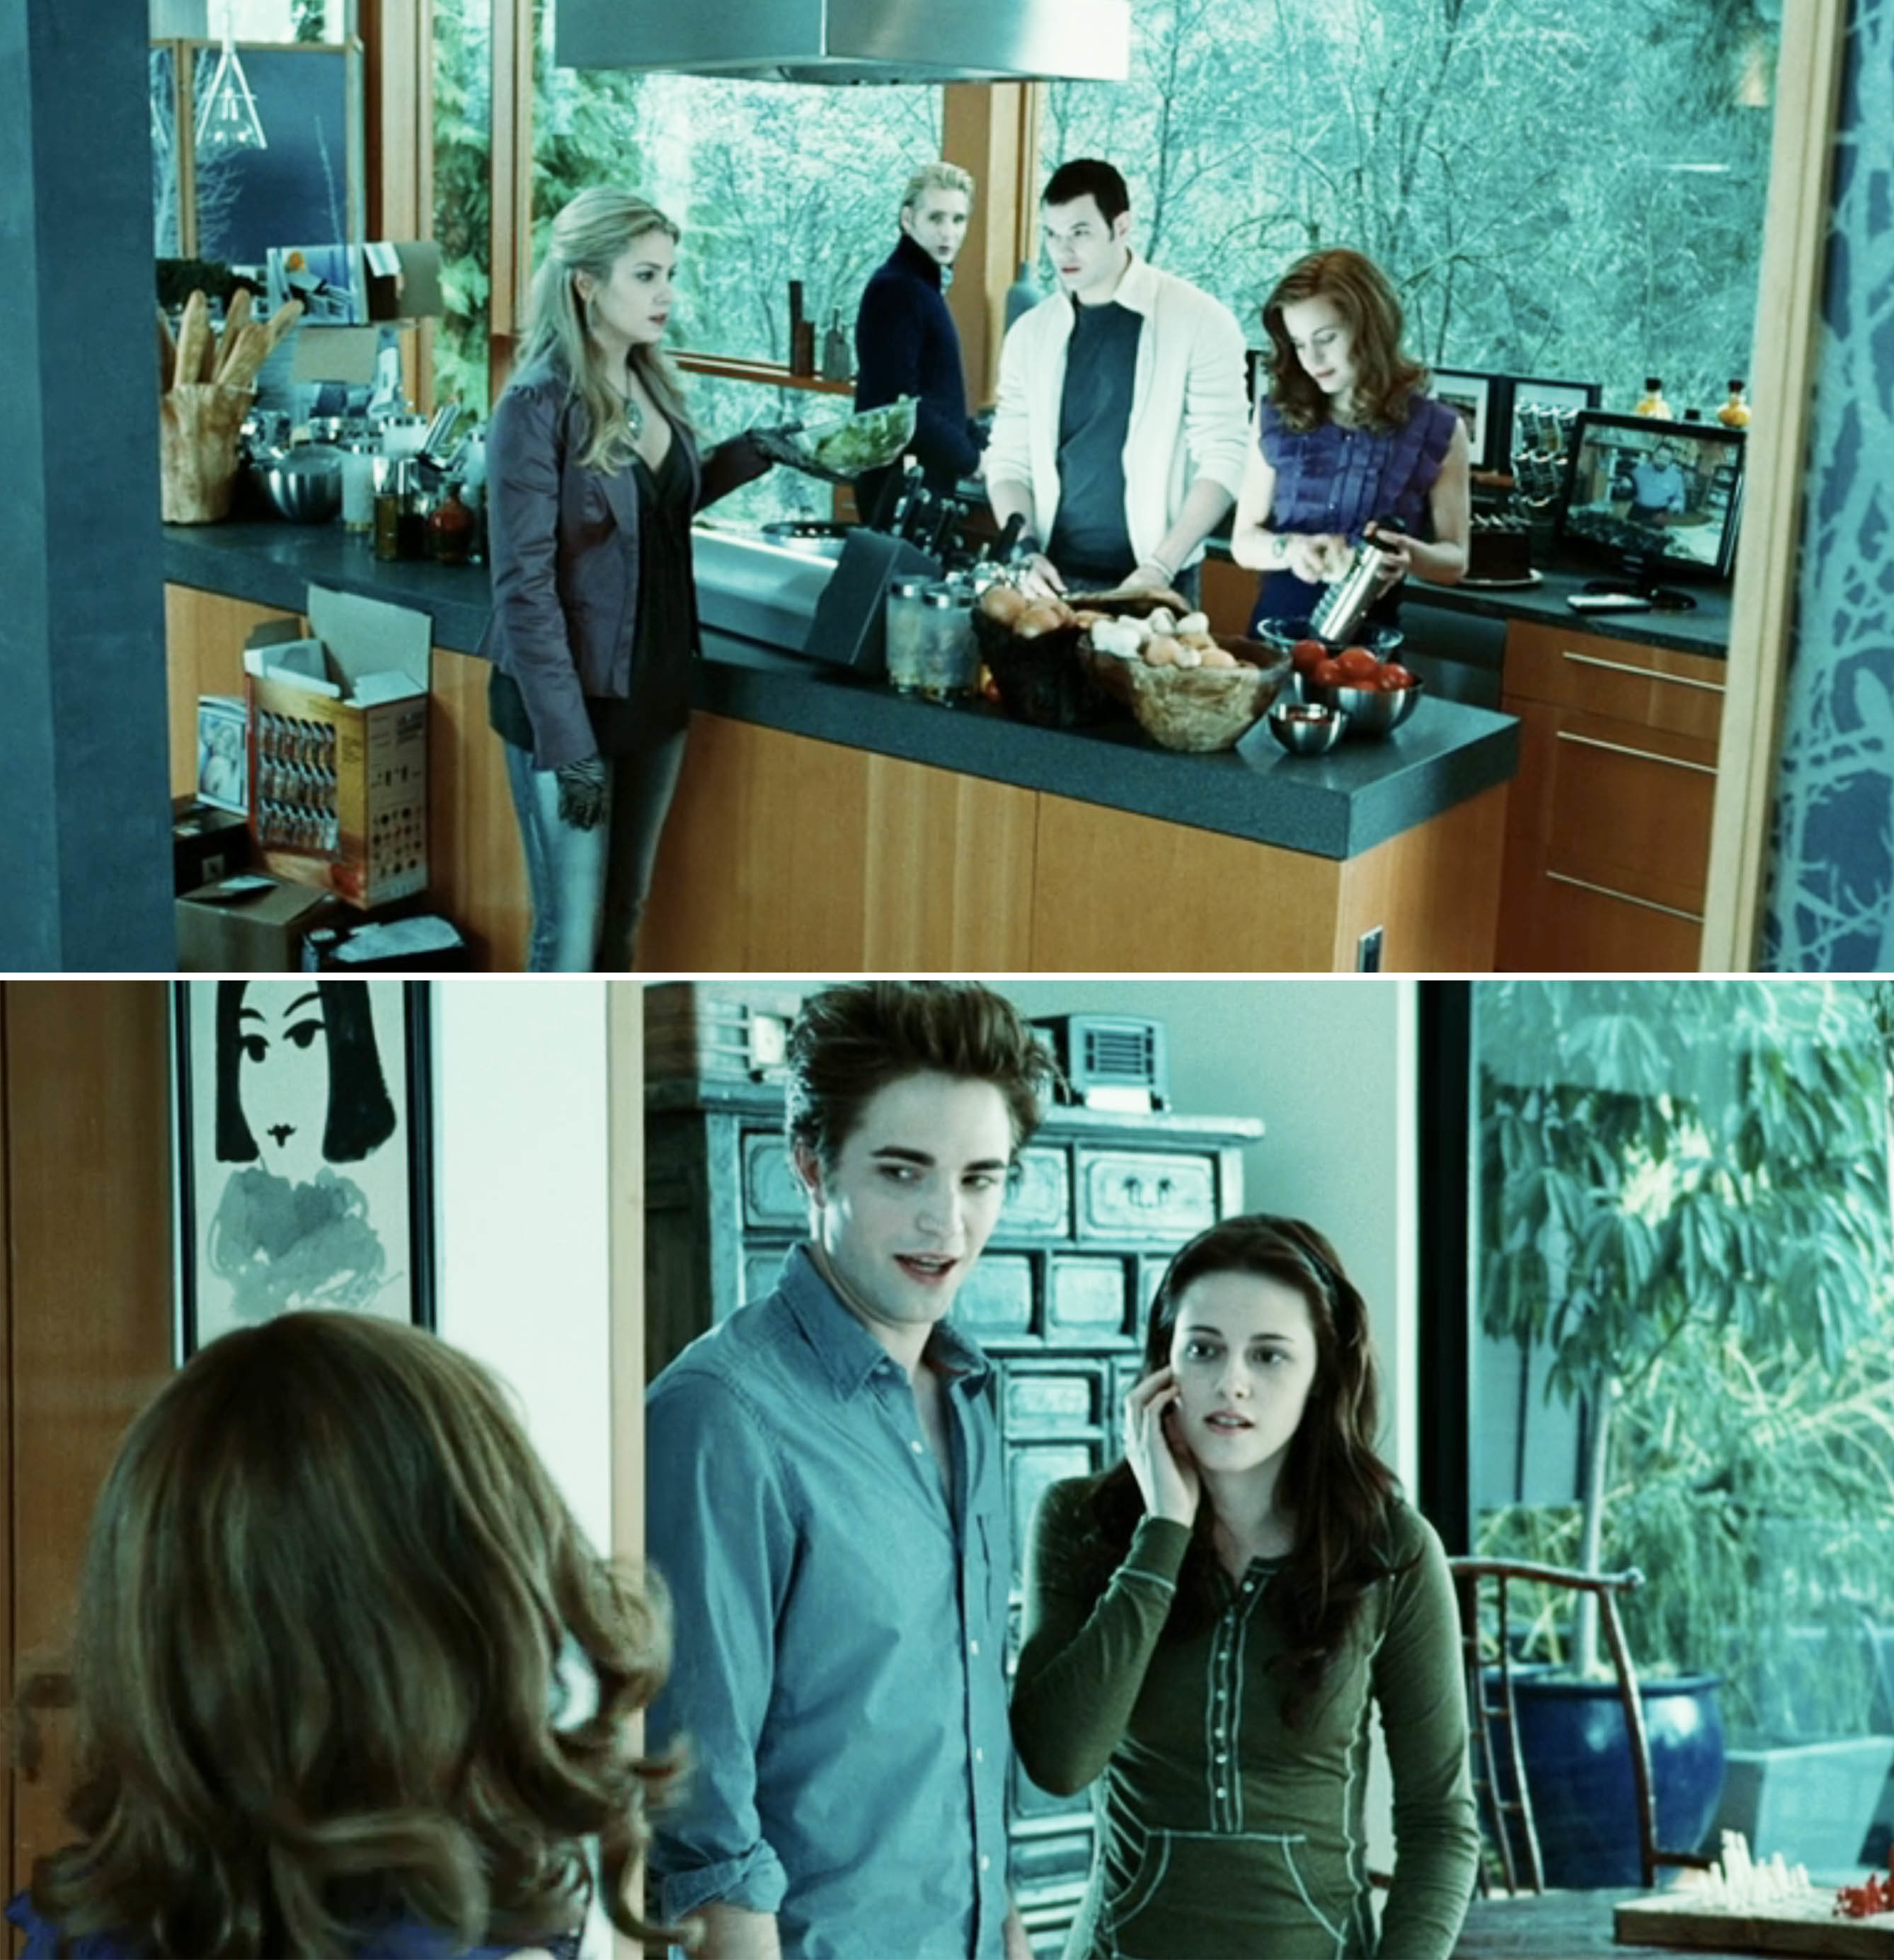 Bella stands beside Edward in the Cullen’s kitchen where other family members prepare food